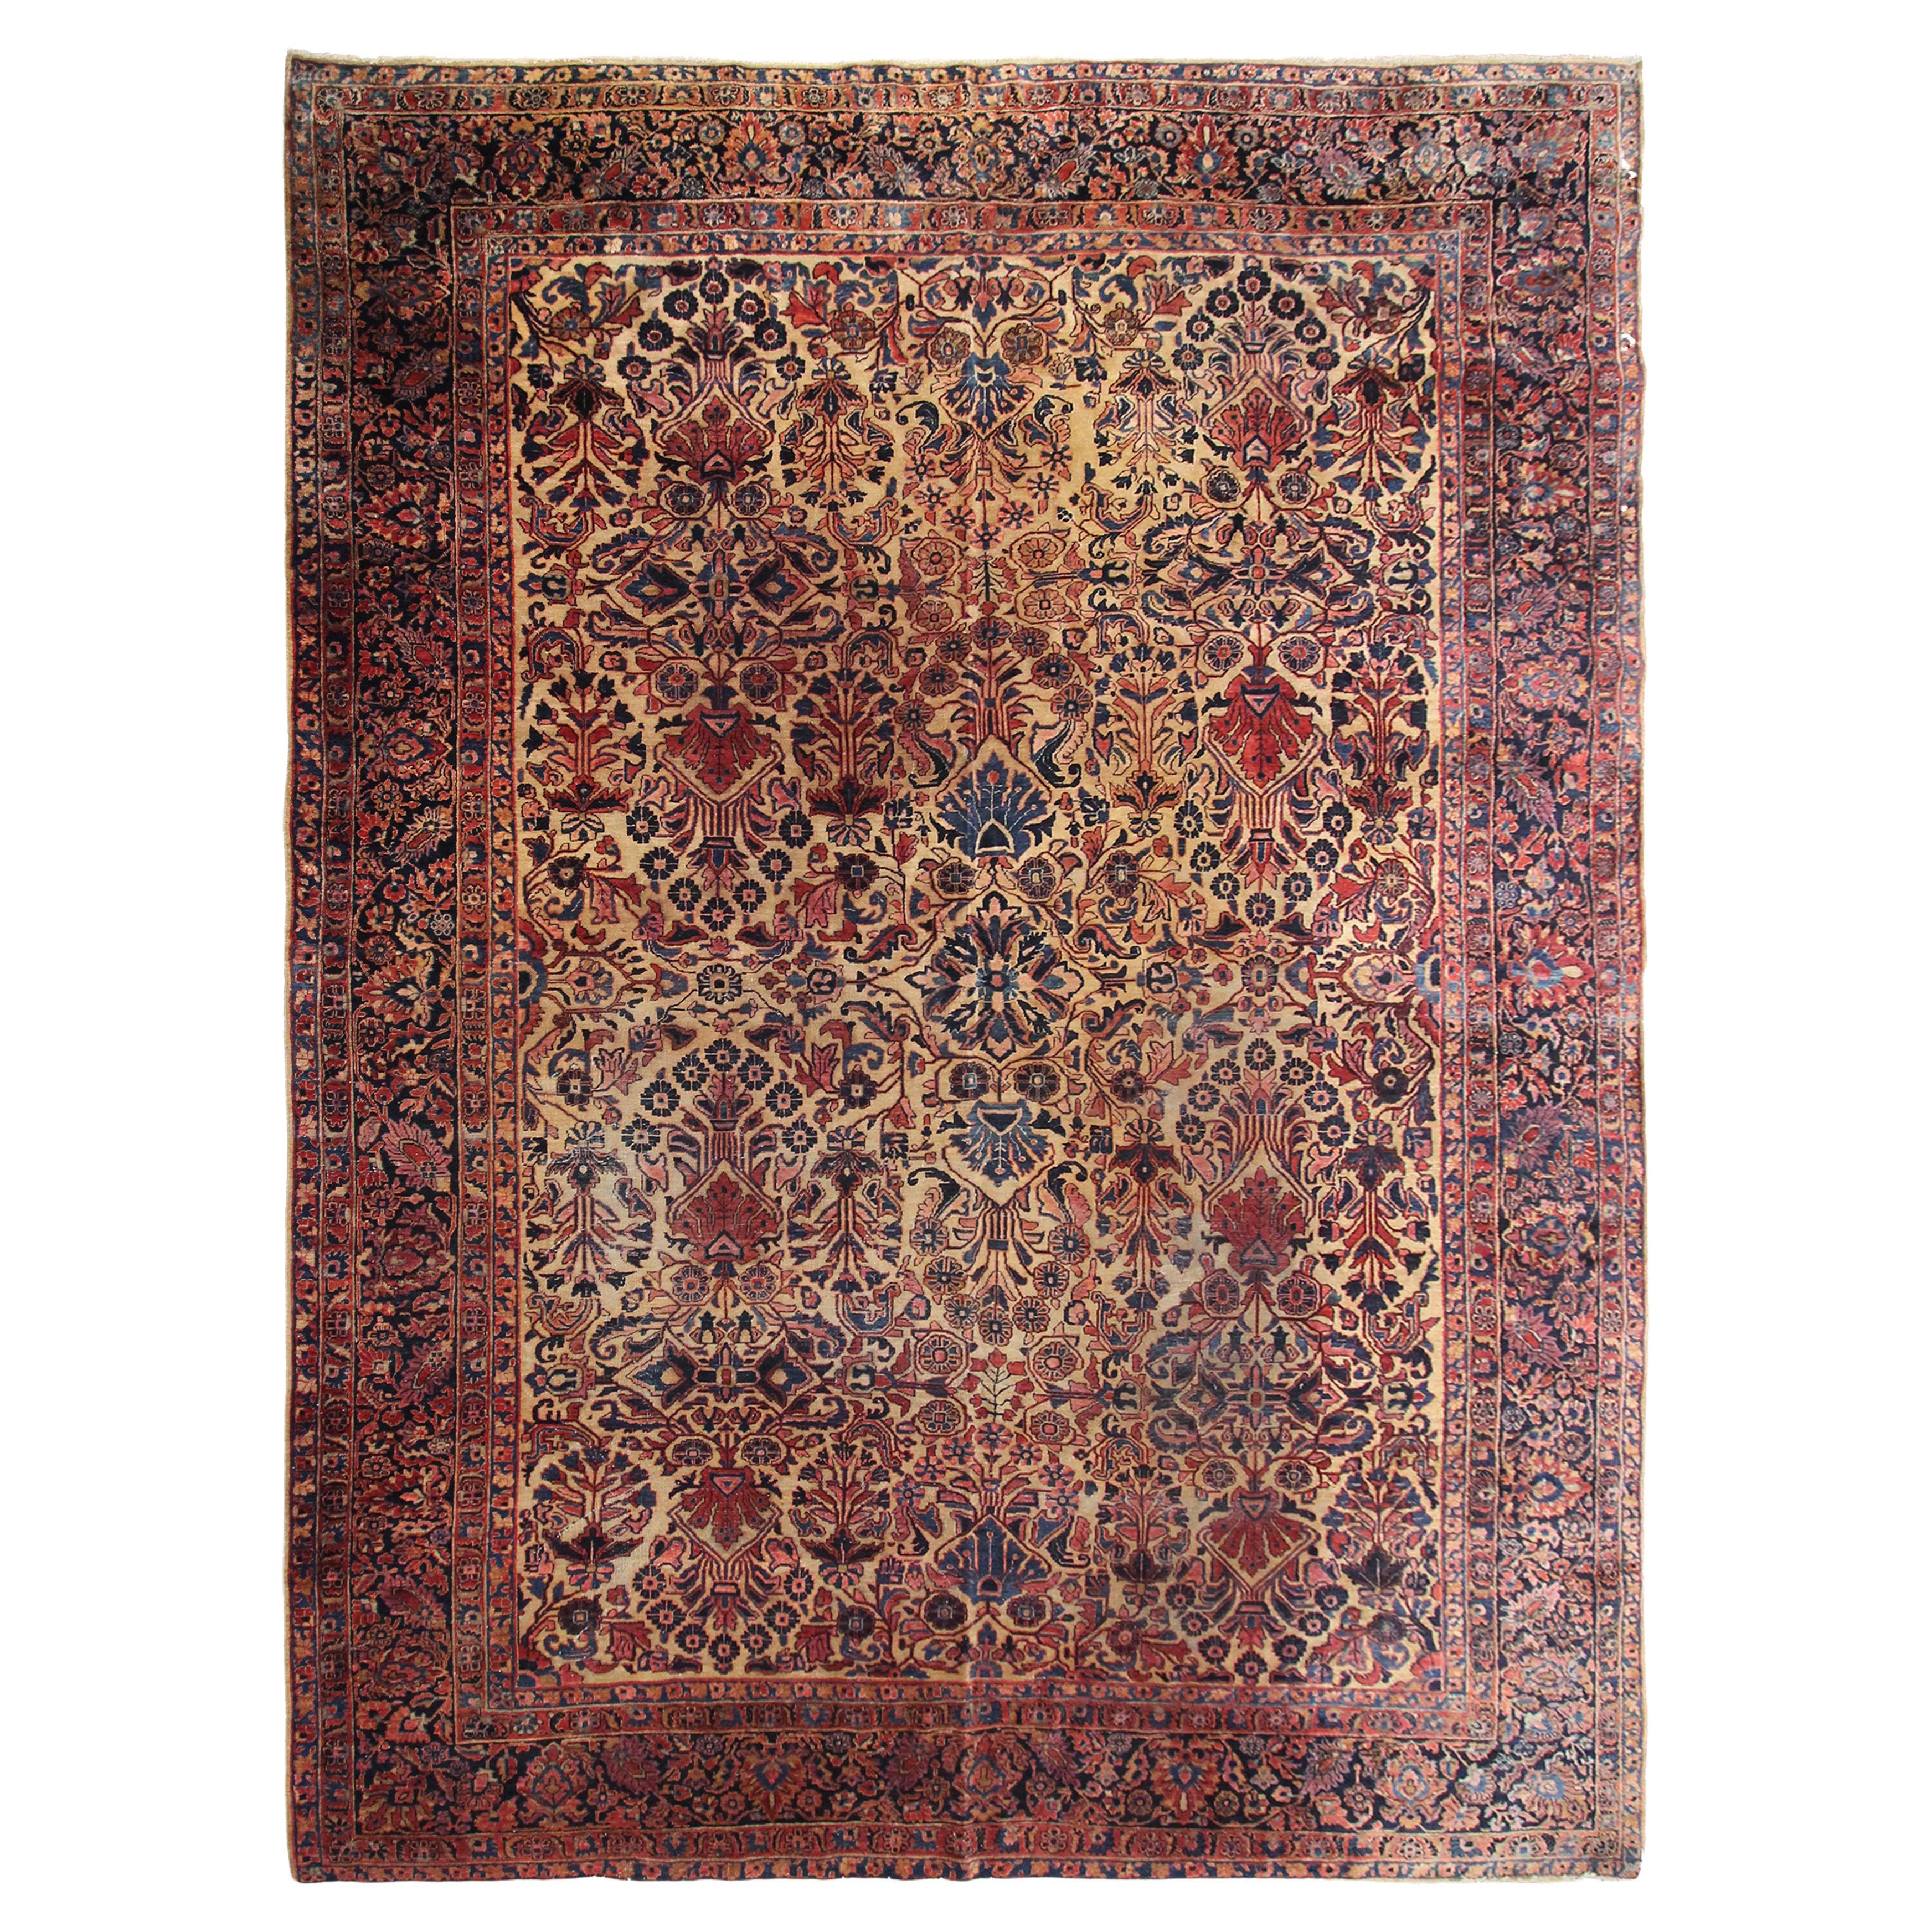 Antique Mohajeran Rug Antique Persian Rug Geometric Floral Gold, 1890 For Sale